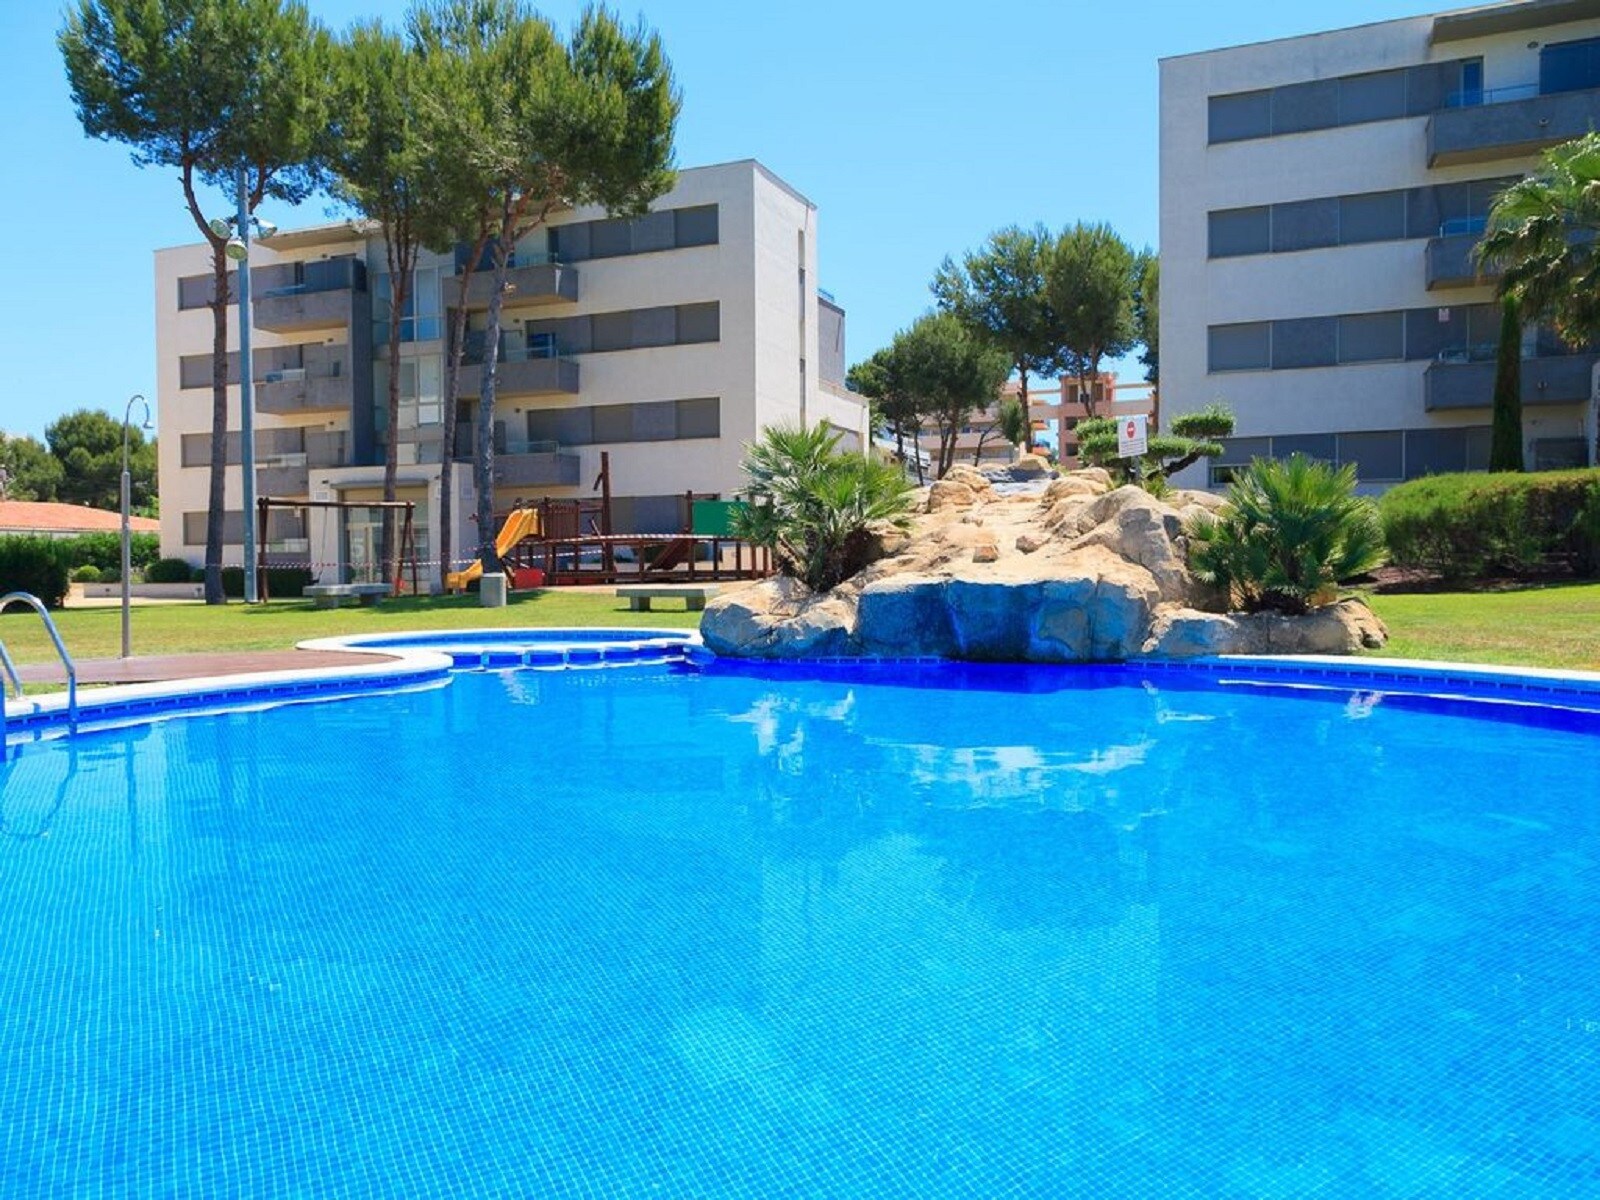 Property Image 1 - Fantastic bright apartment Ideal for a family holiday